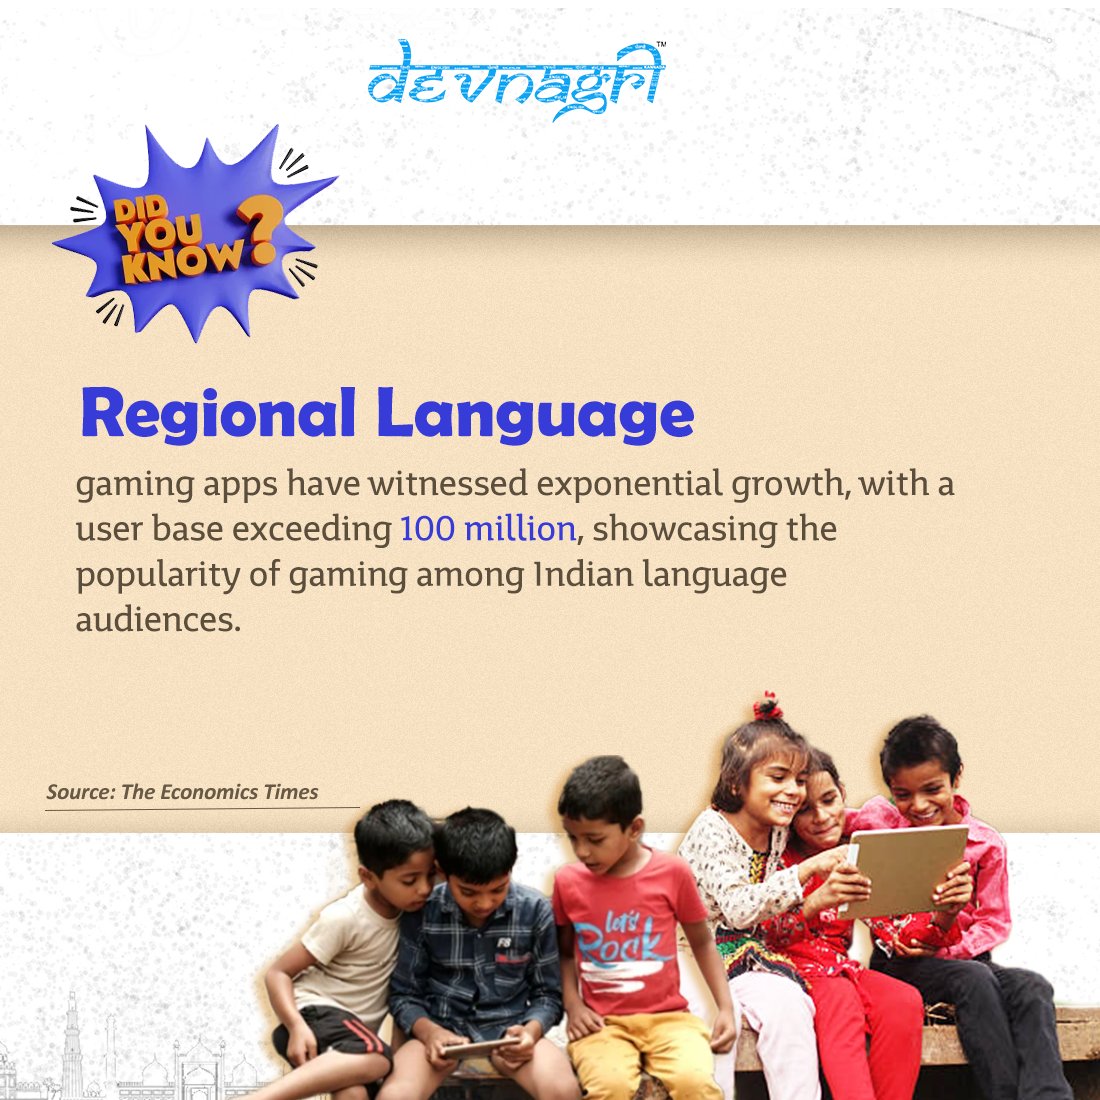 #didyouknow #facts #fact #knowledge #factsdaily #didyouknowfacts #dailyfacts #amazingfacts #knowledgeispower #factz #funfacts #interestingfacts #generalknowledge #truefacts #doyouknow #india #languages #translation #Devnagri